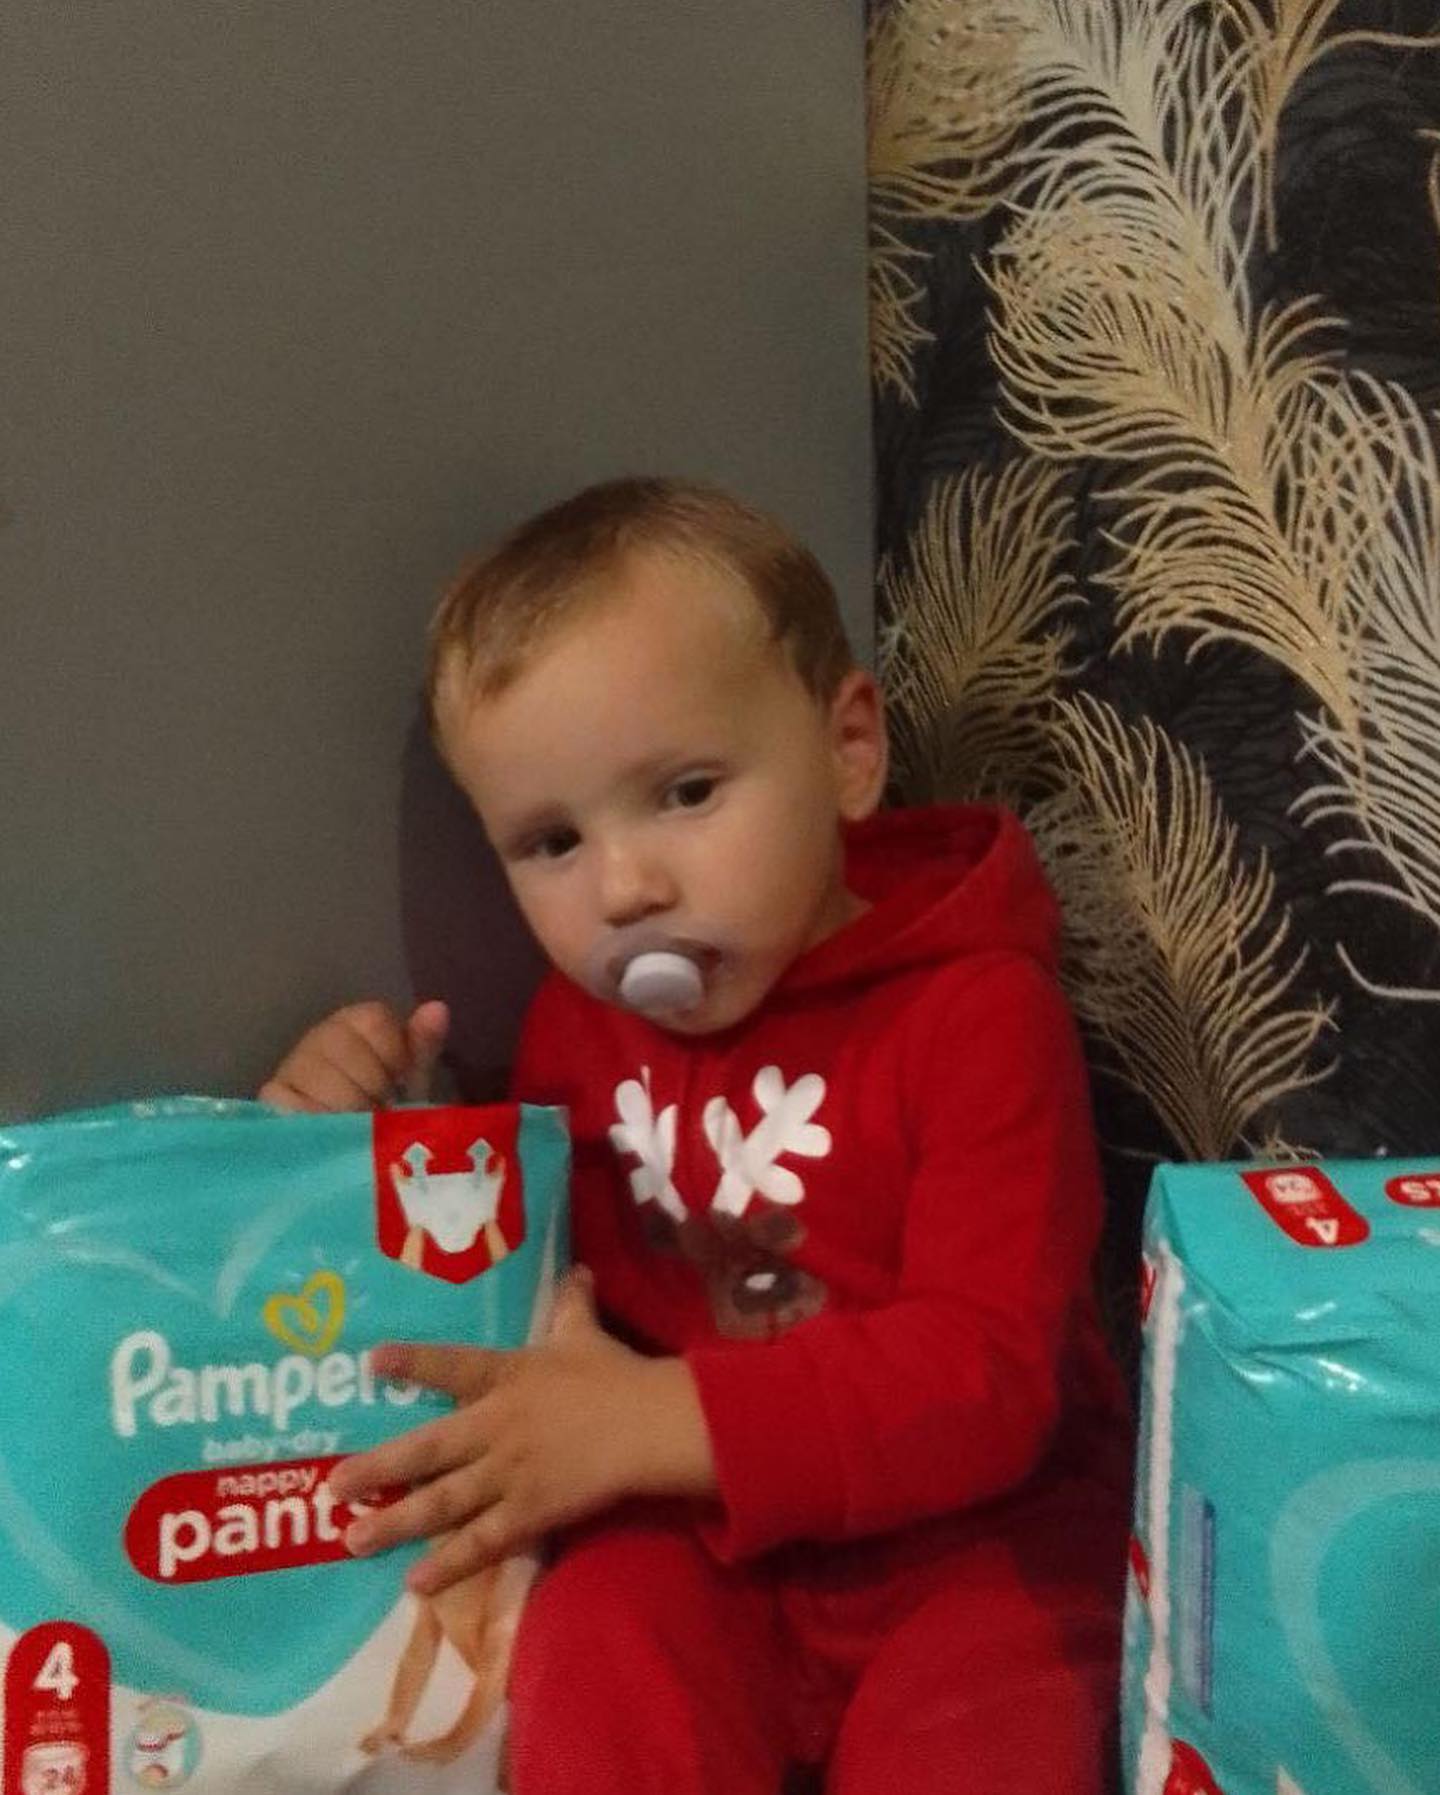 A young boy in a red pajama sitting next to a pack of pampers pajamas.